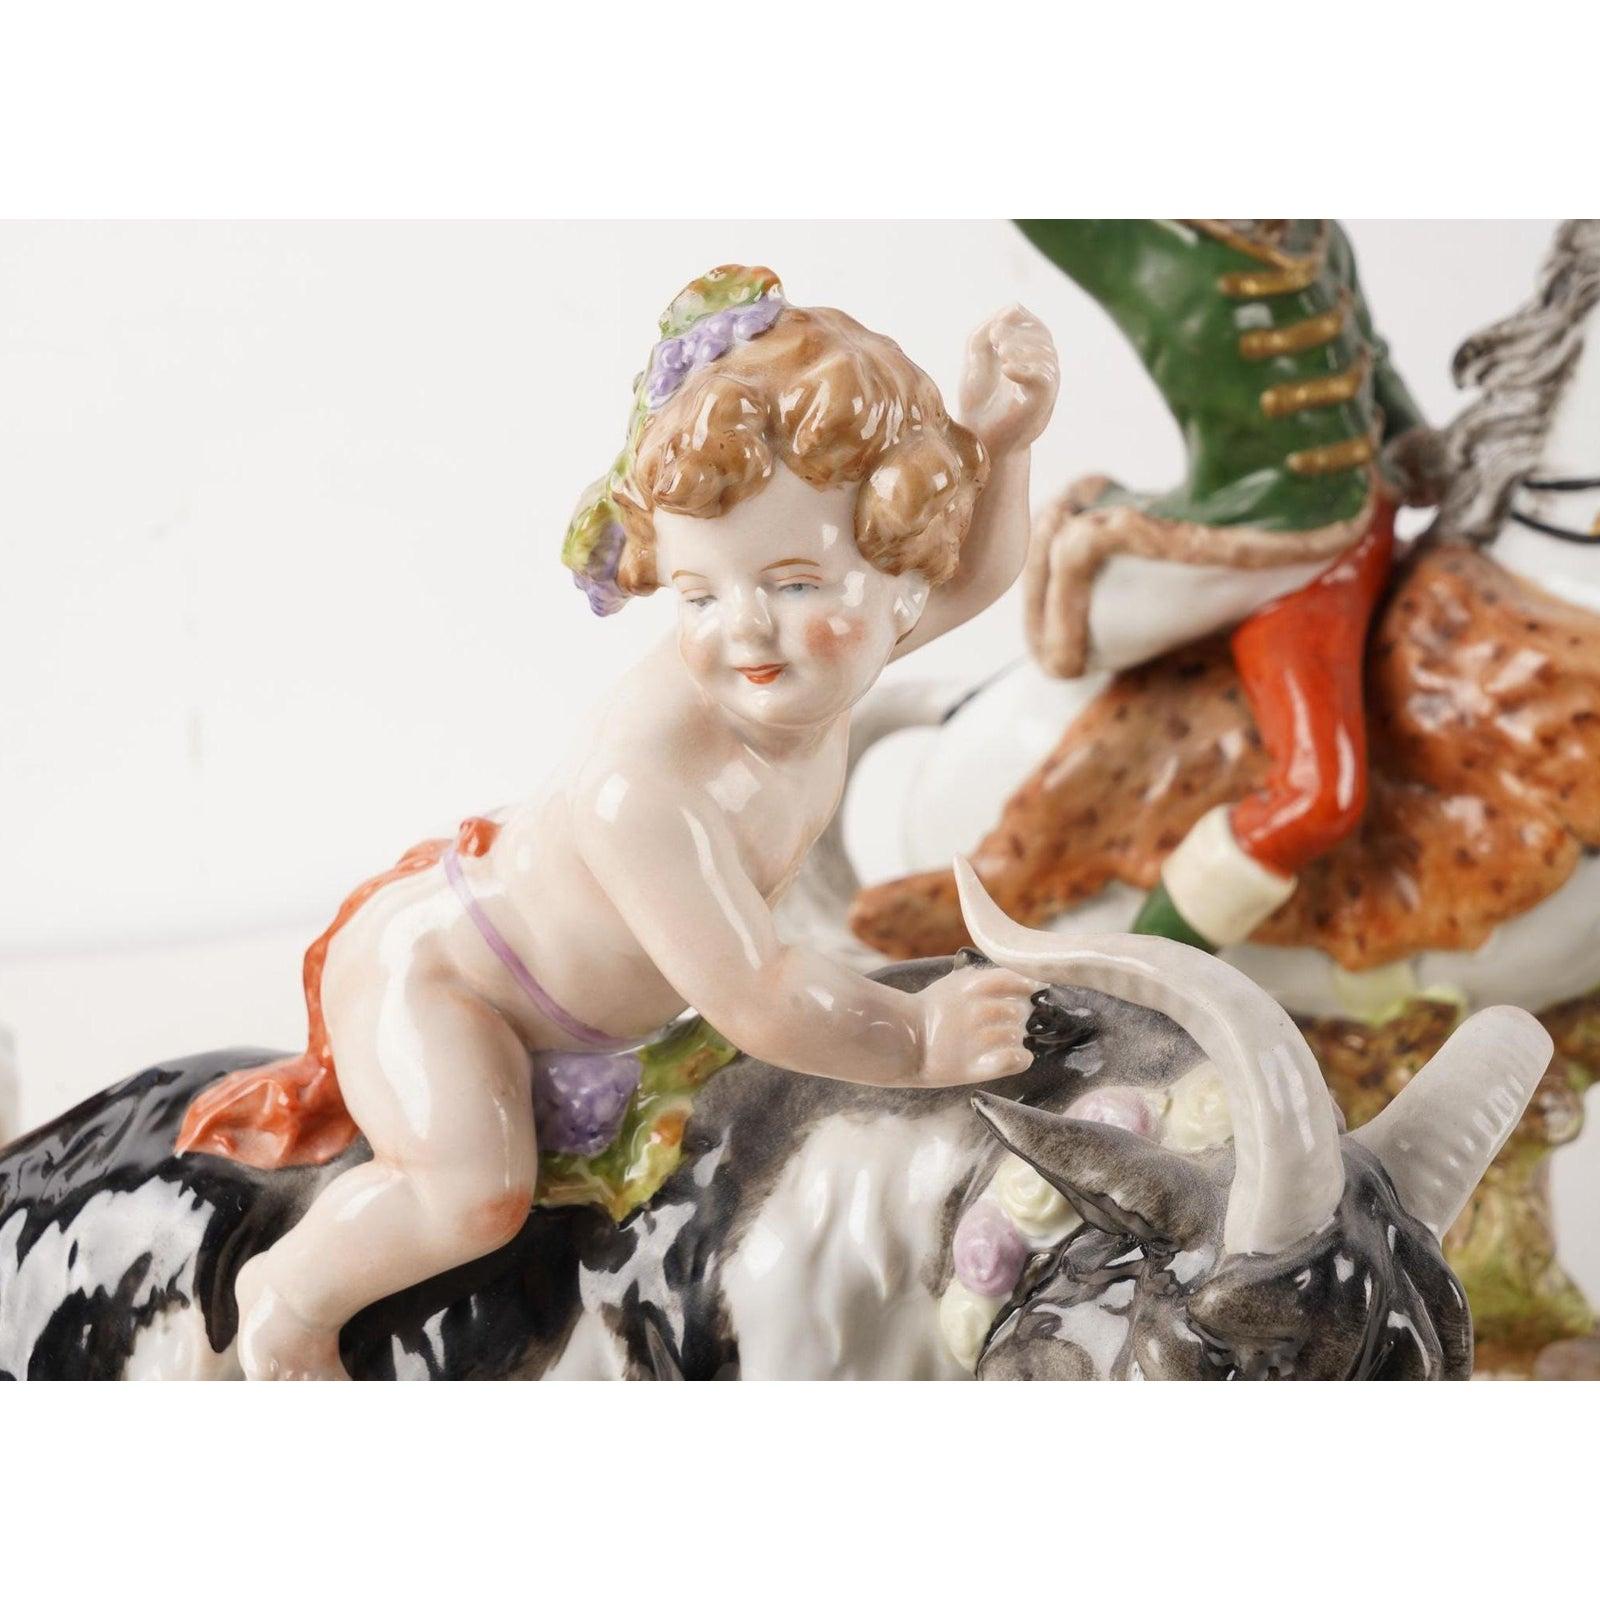 Vintage Scheibe Alsbach Kister German porcelain nude putti riding thuringian goat figurine.
Additional information:
Materials: Porcelain
Color: Pink
Brand: Dresden porcelain
Period: Early 20th century
Styles: Louis XVI
Item type: Vintage,